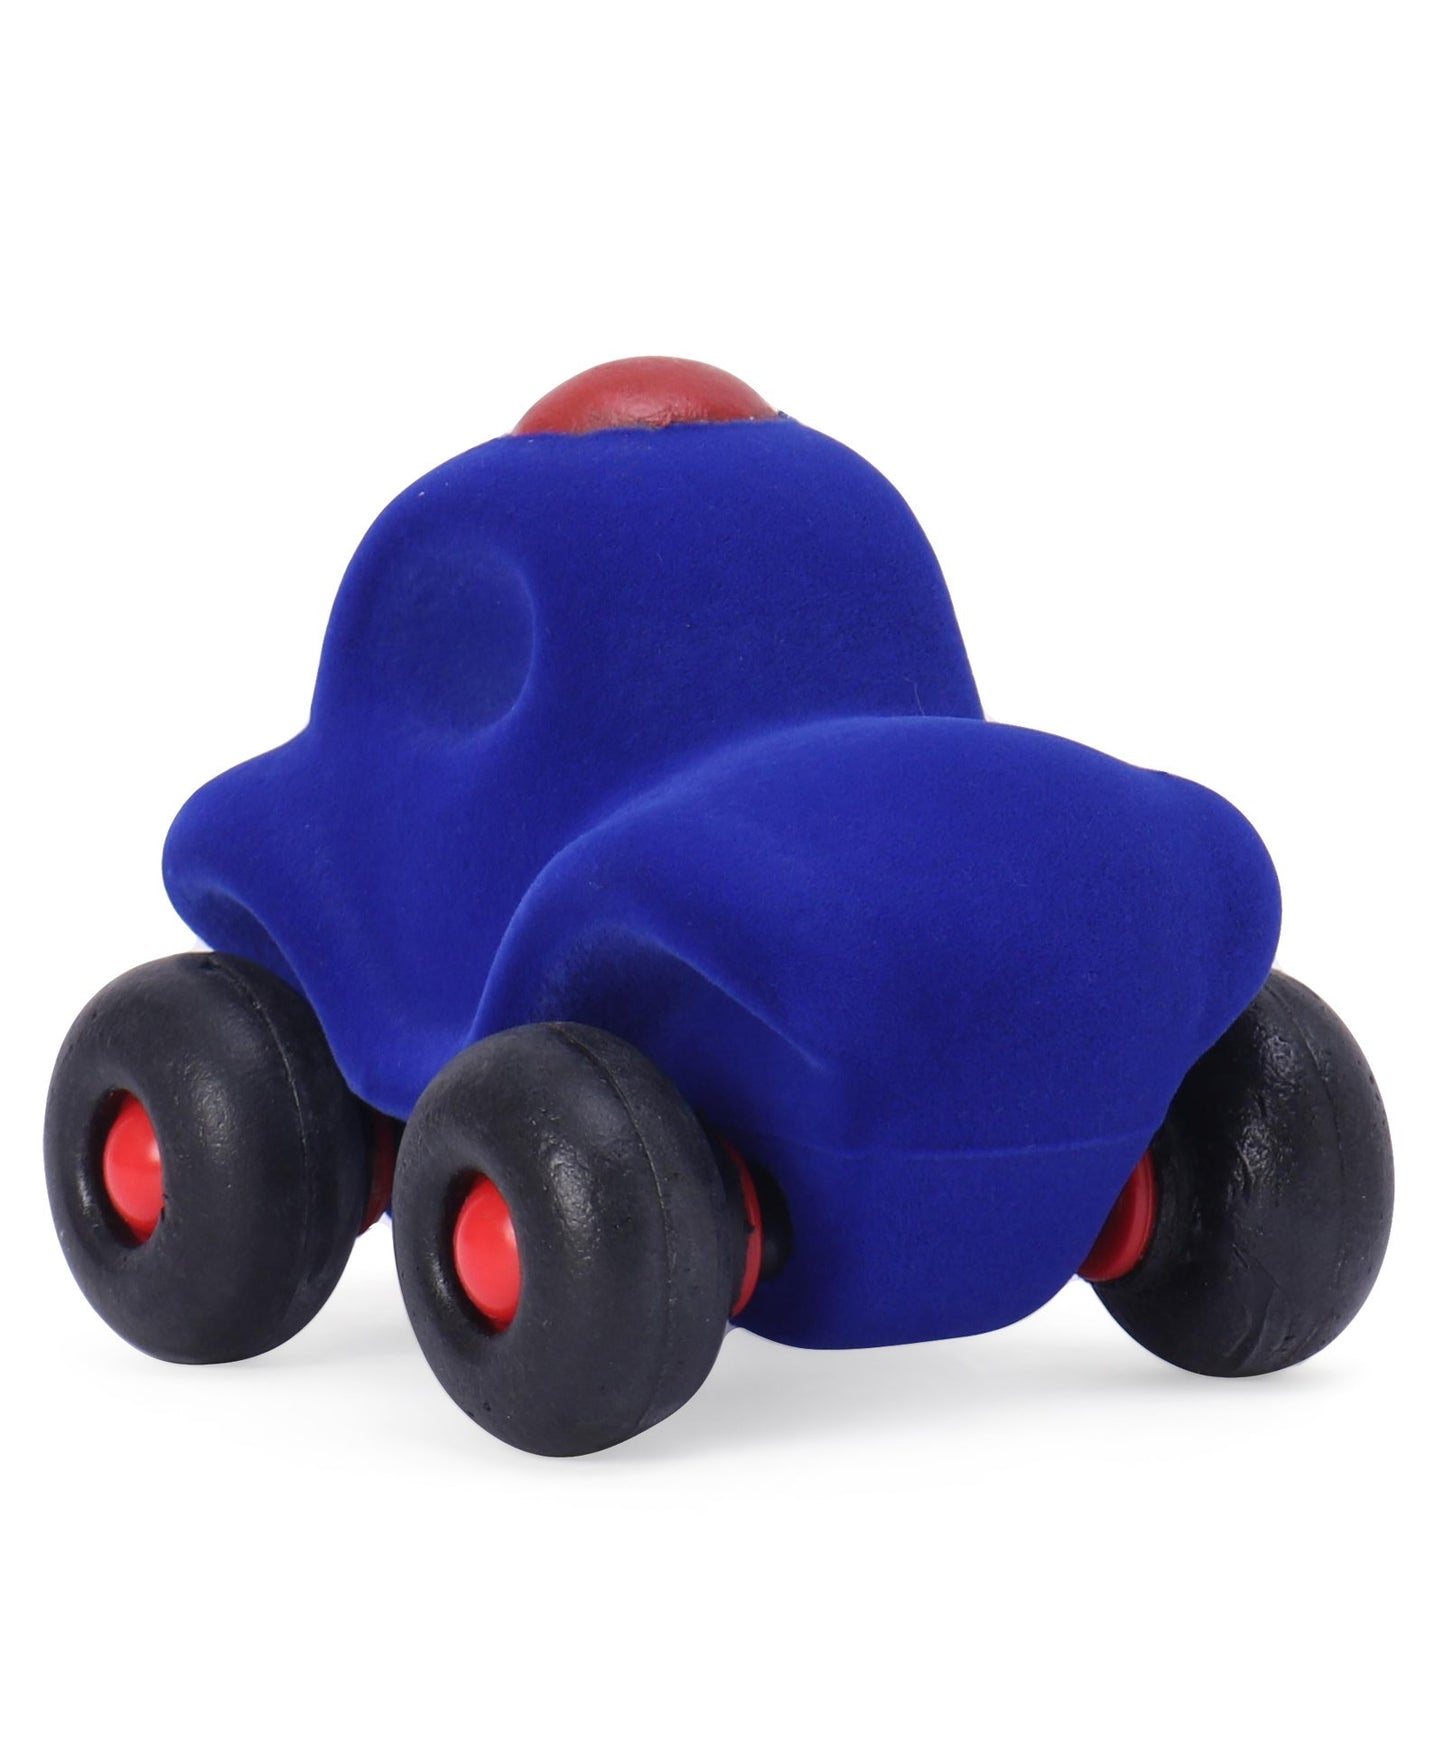 Rubbabu Free Wheel Little Vehicles - Pack of 8 (Colour May Vary)